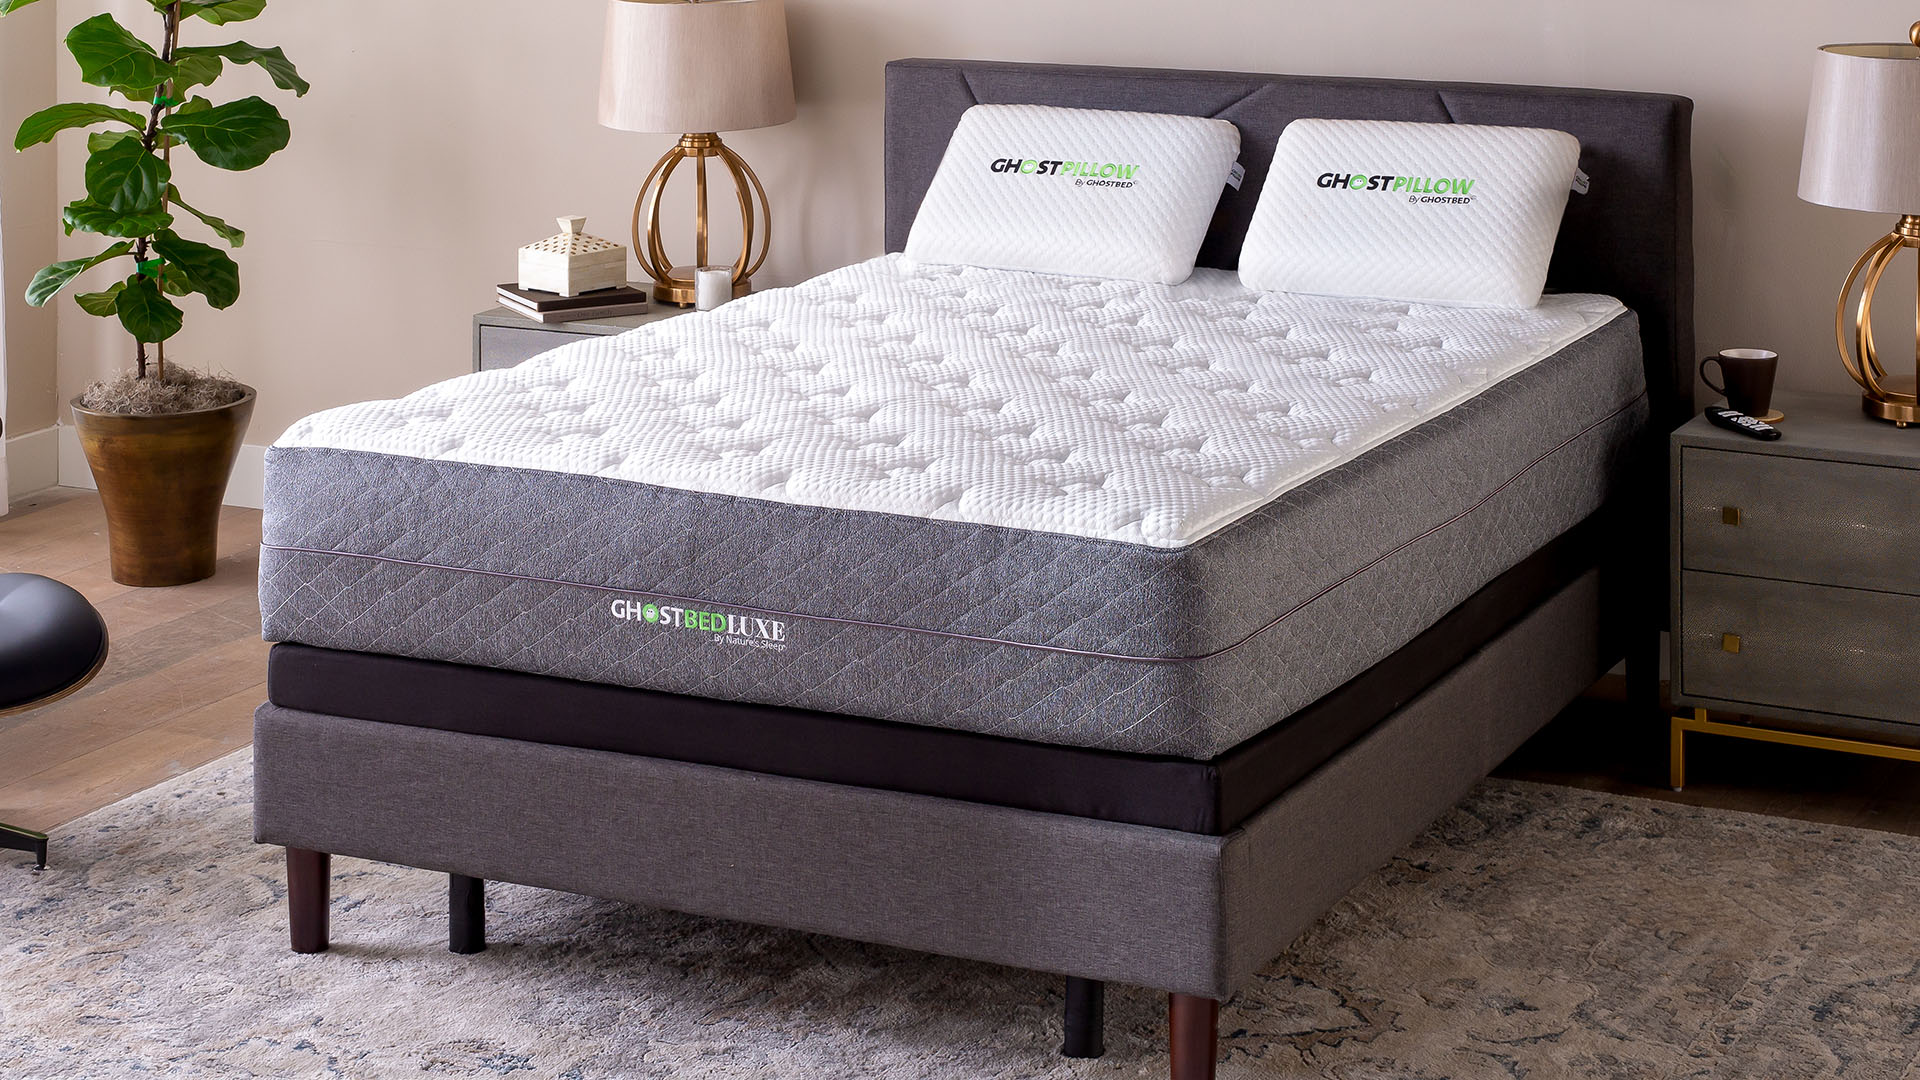 GhostBed Luxe mattress in a room